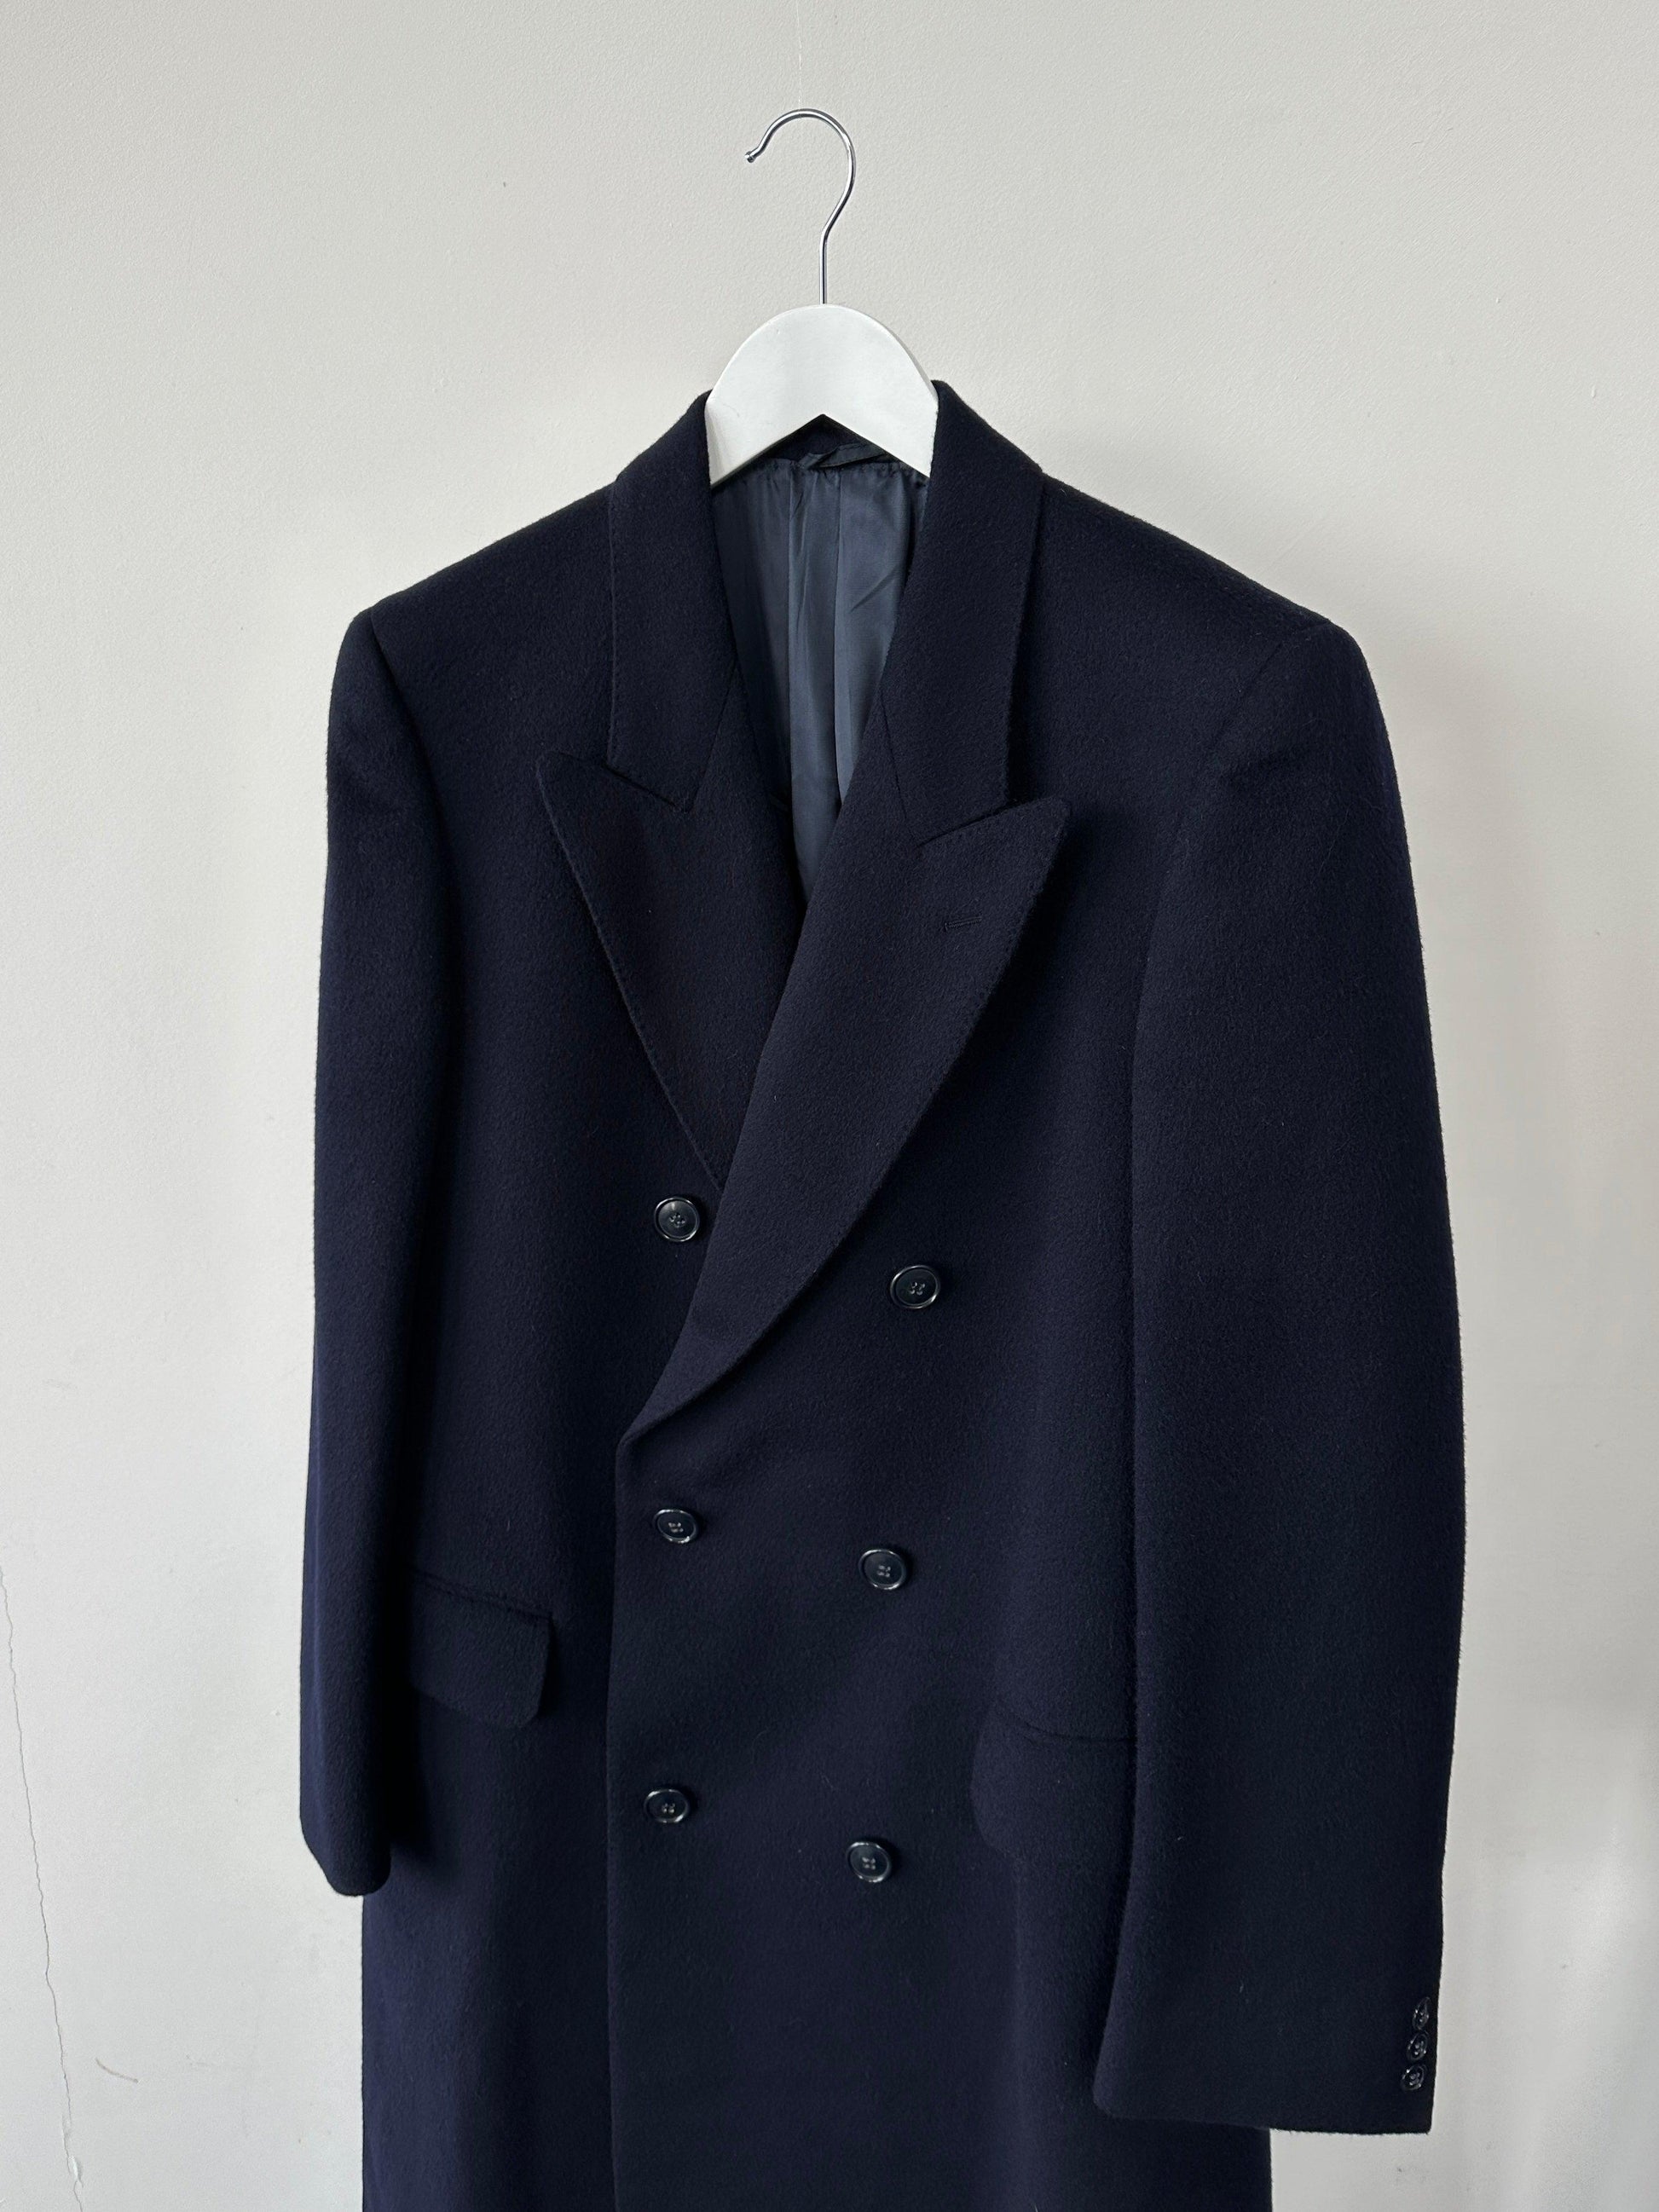 Vintage Pure Virgin Wool Double Breasted Coat - M/L - Known Source